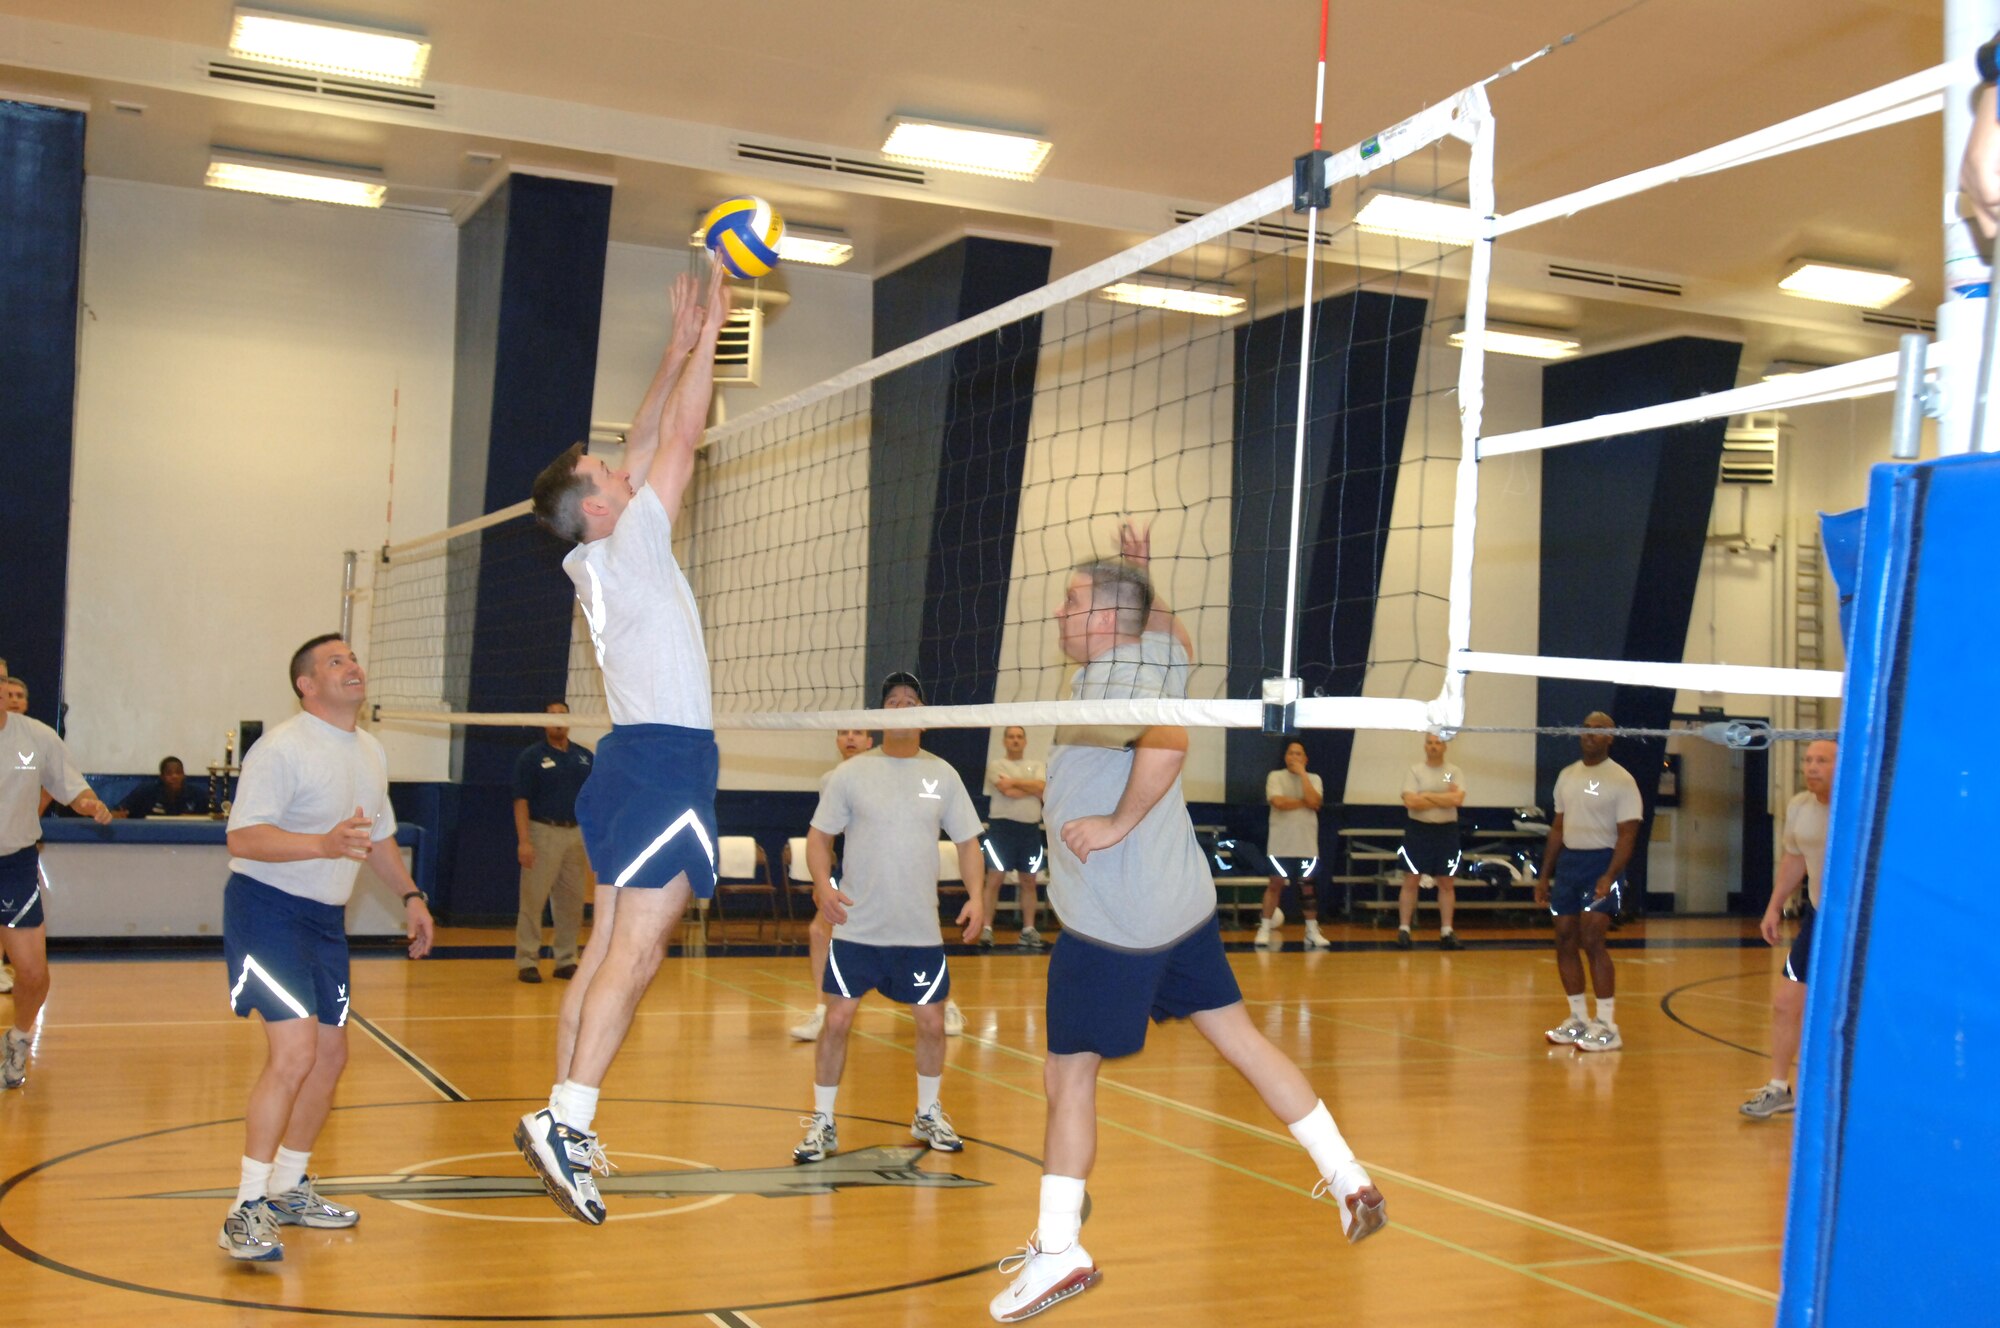 MISAWA AIR BASE, Japan -- Col. T.J. O'Shaughnessy, 35th Fighter Wing commander, faces off with Command Chief Master Sgt. Ricky Price during the Eagles vs. Chiefs volleyball game at the Potter Fitness Center, March 14, 2008.  The competition led to the Chiefs victory.  (U.S. Air Force photo by Senior Airman Robert Barnett)